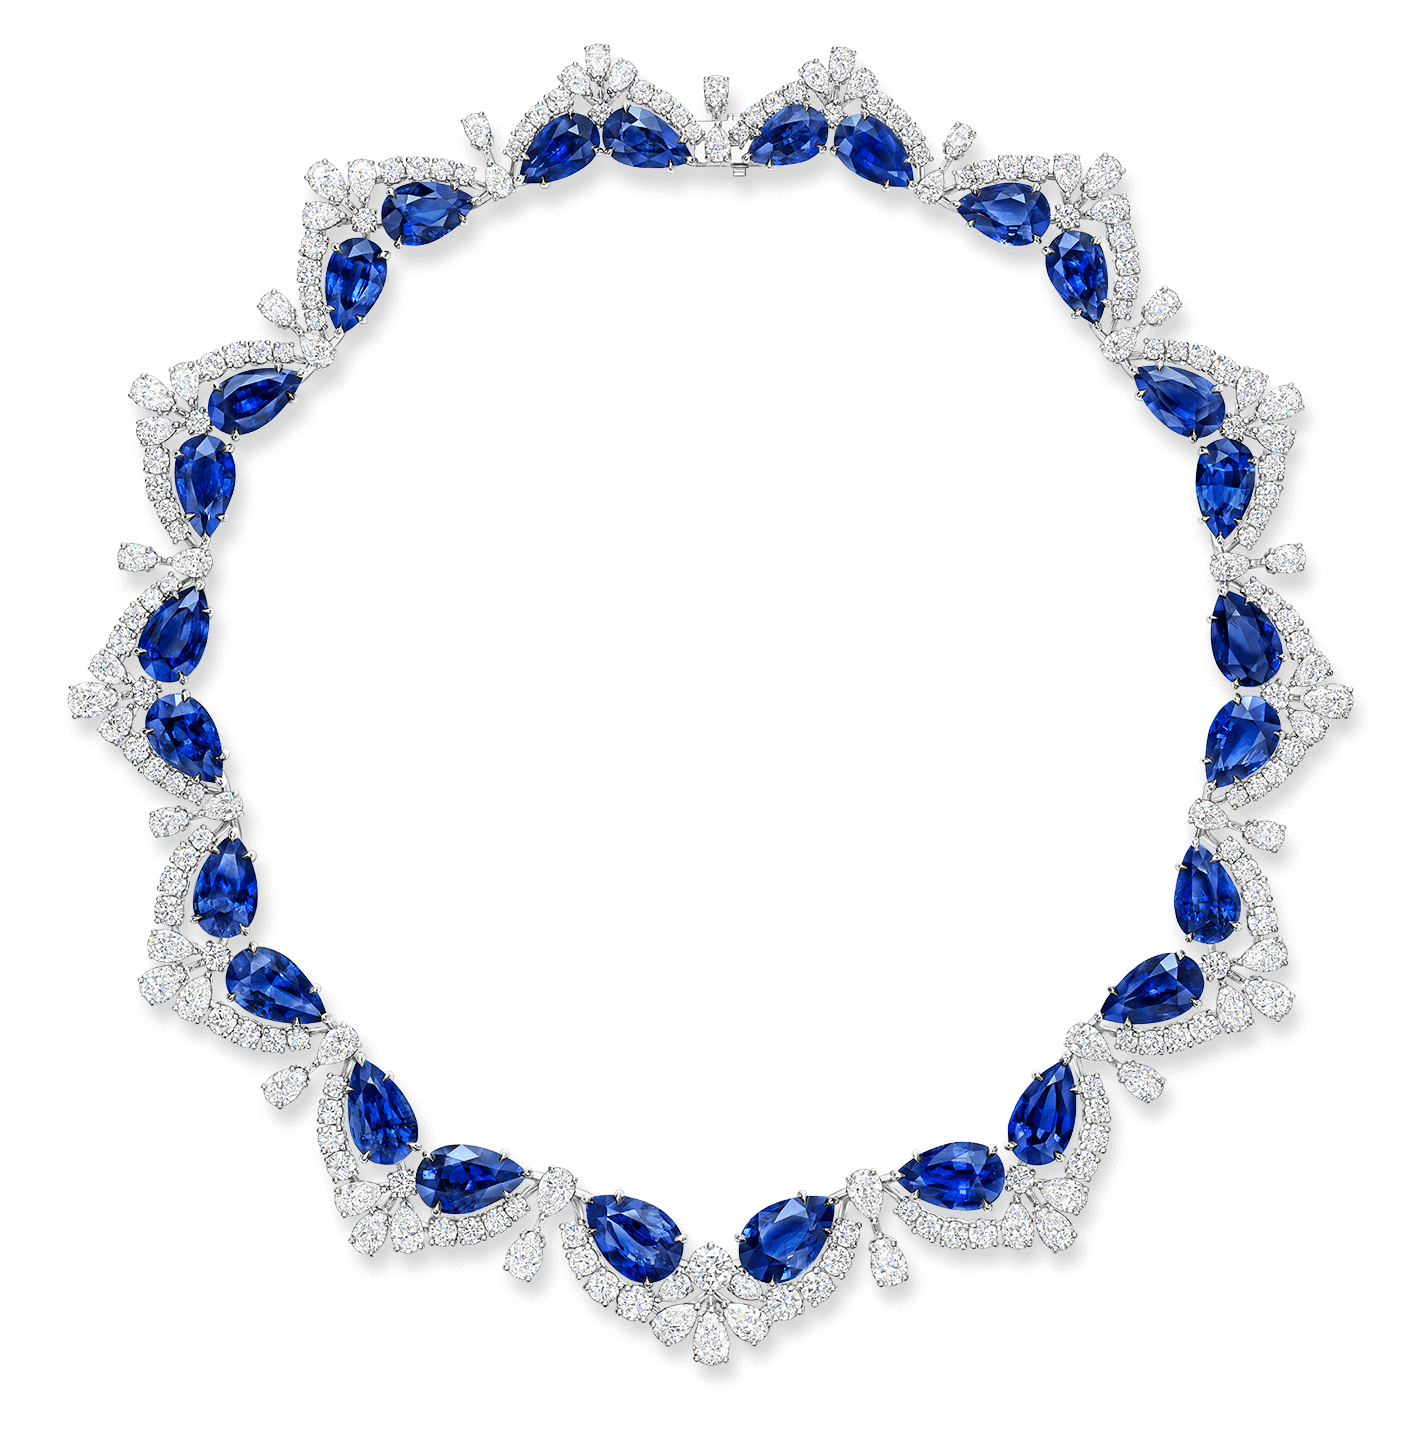 A Fifth Avenue Sapphire and Diamond Arch Necklace